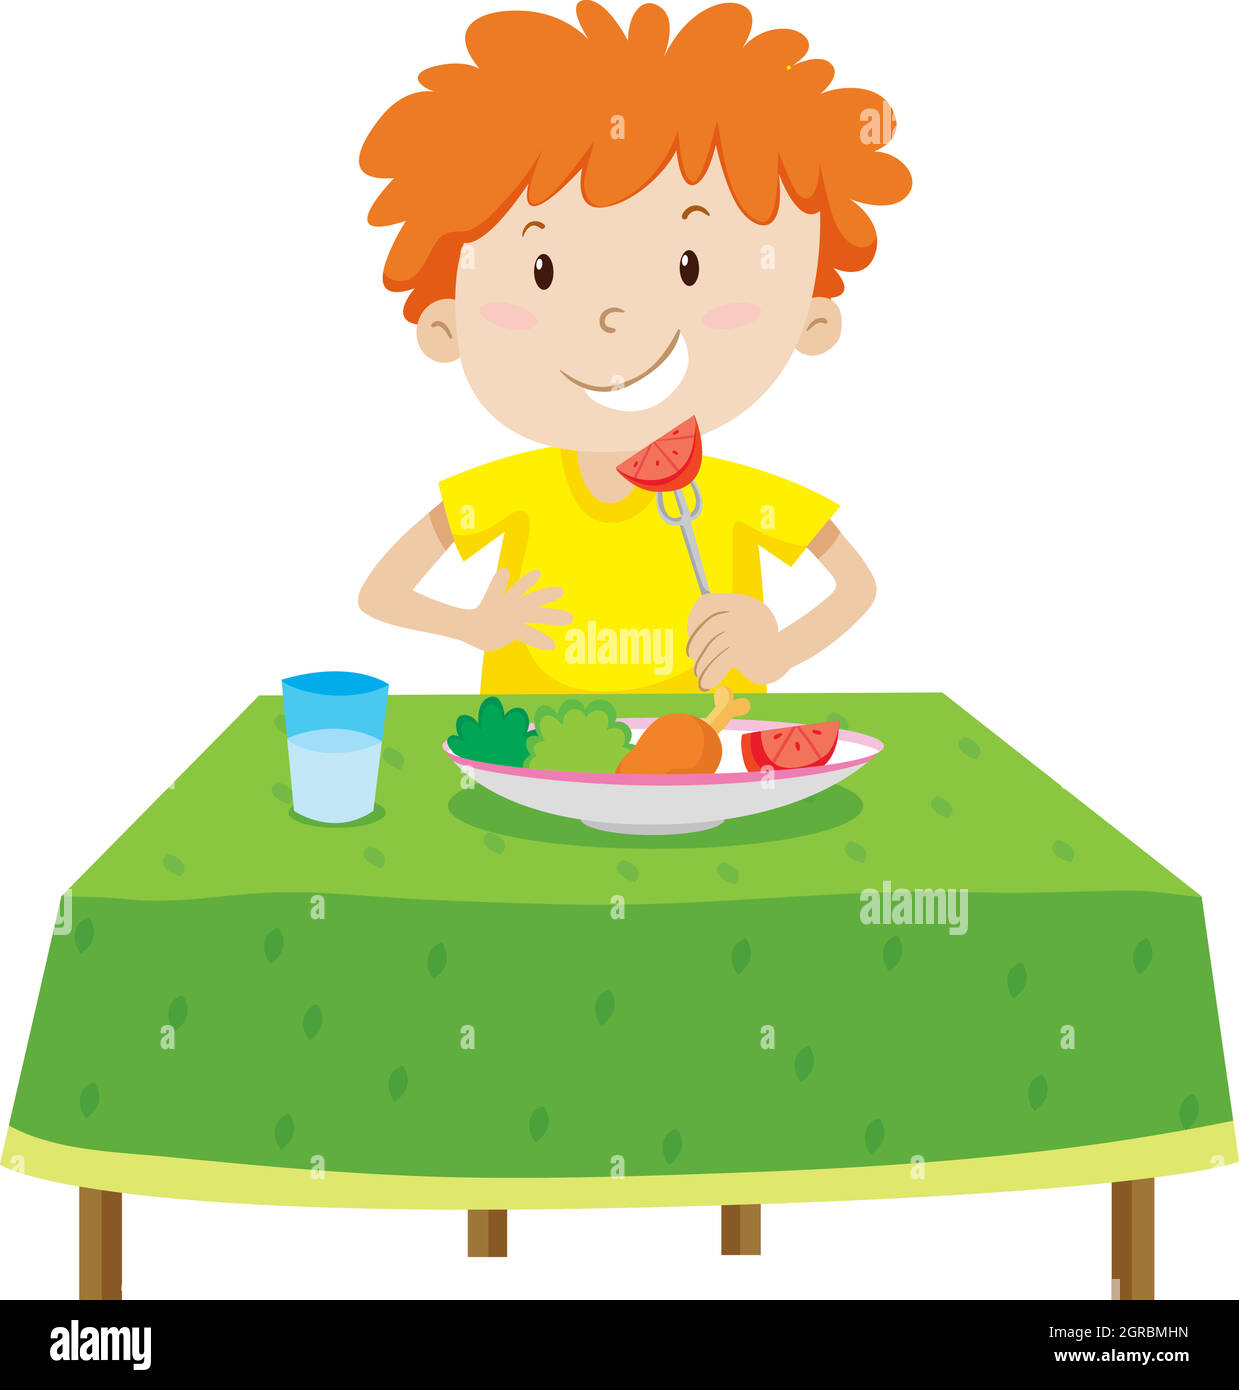 Little boy eating on the table Stock Vector